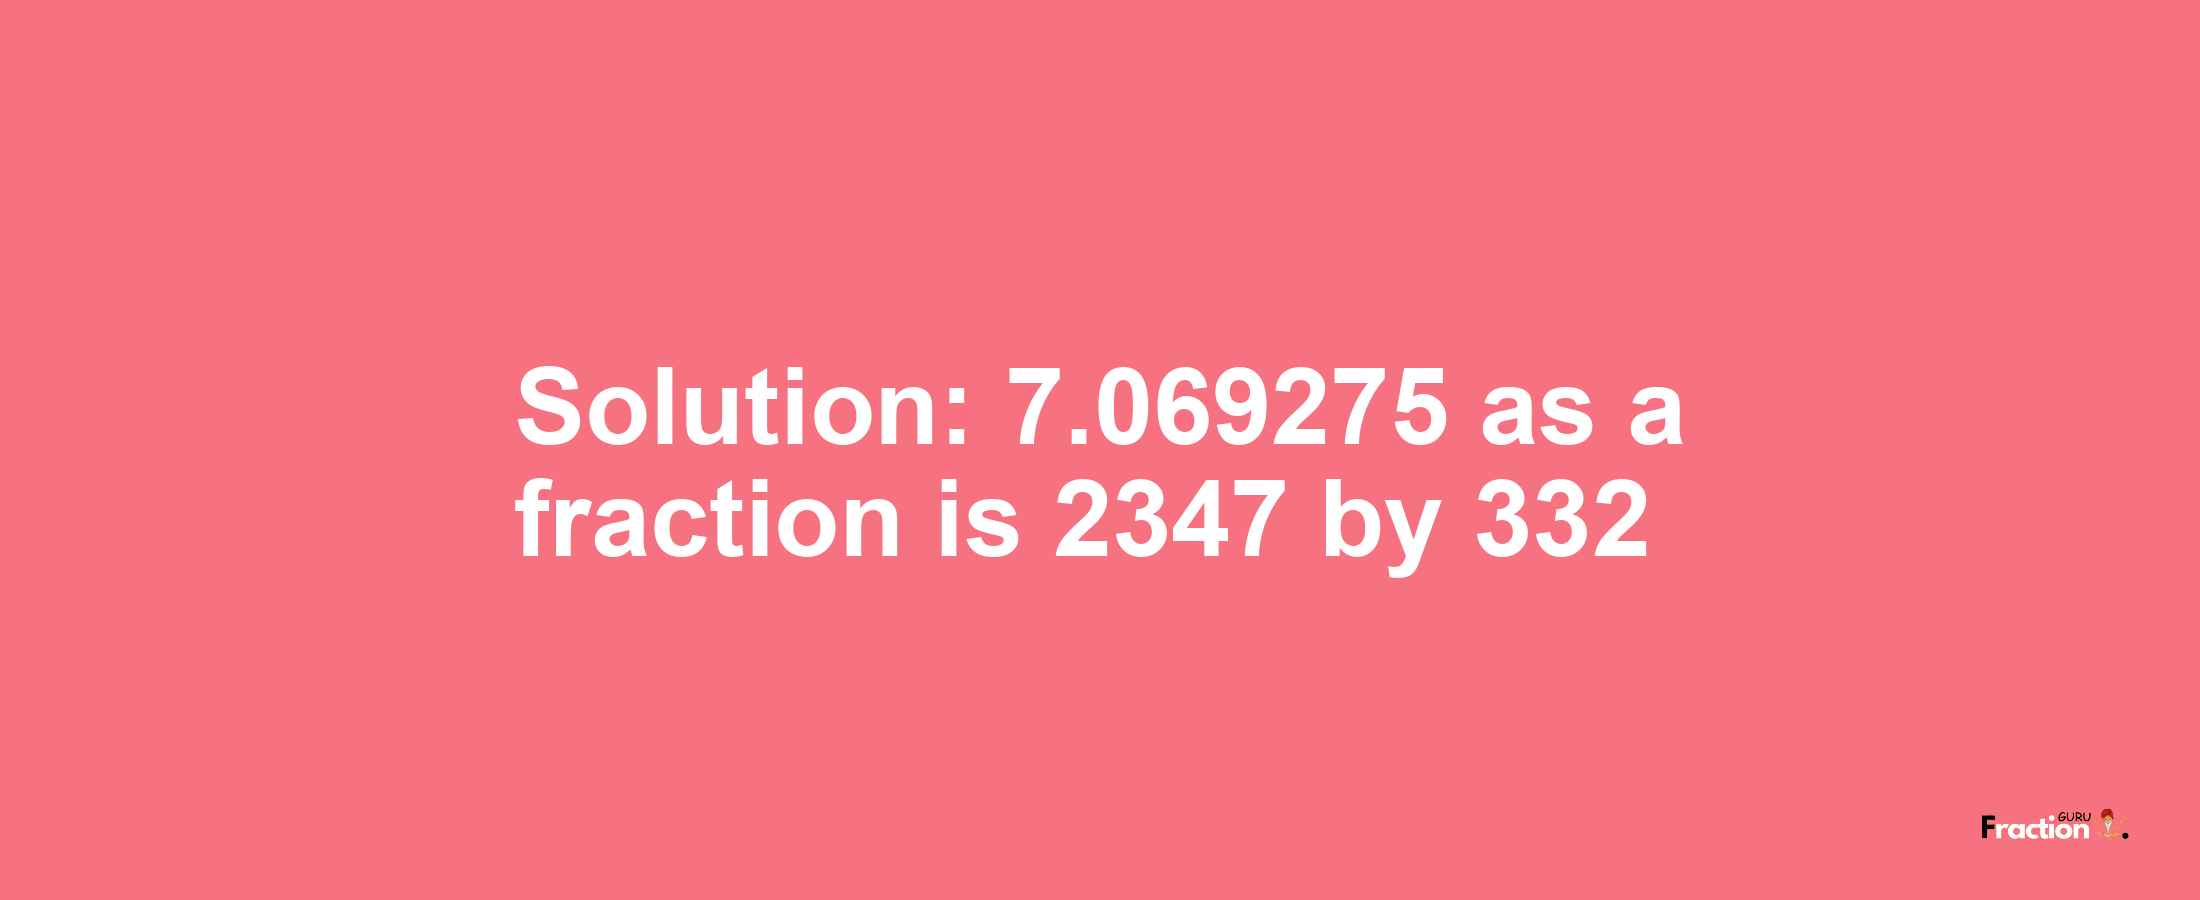 Solution:7.069275 as a fraction is 2347/332